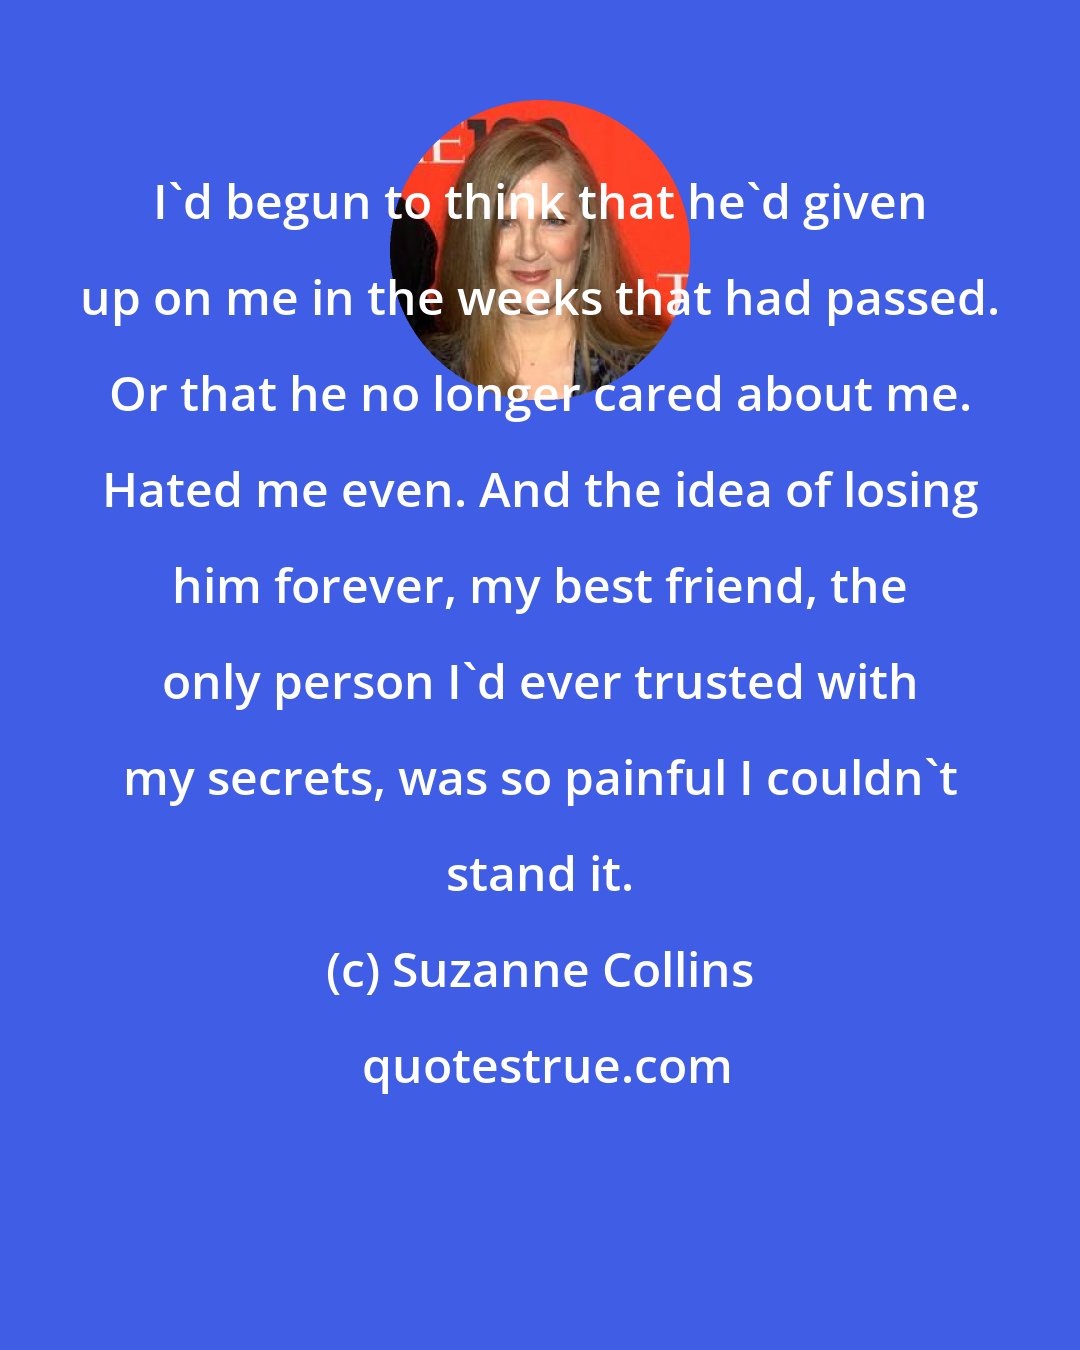 Suzanne Collins: I'd begun to think that he'd given up on me in the weeks that had passed. Or that he no longer cared about me. Hated me even. And the idea of losing him forever, my best friend, the only person I'd ever trusted with my secrets, was so painful I couldn't stand it.